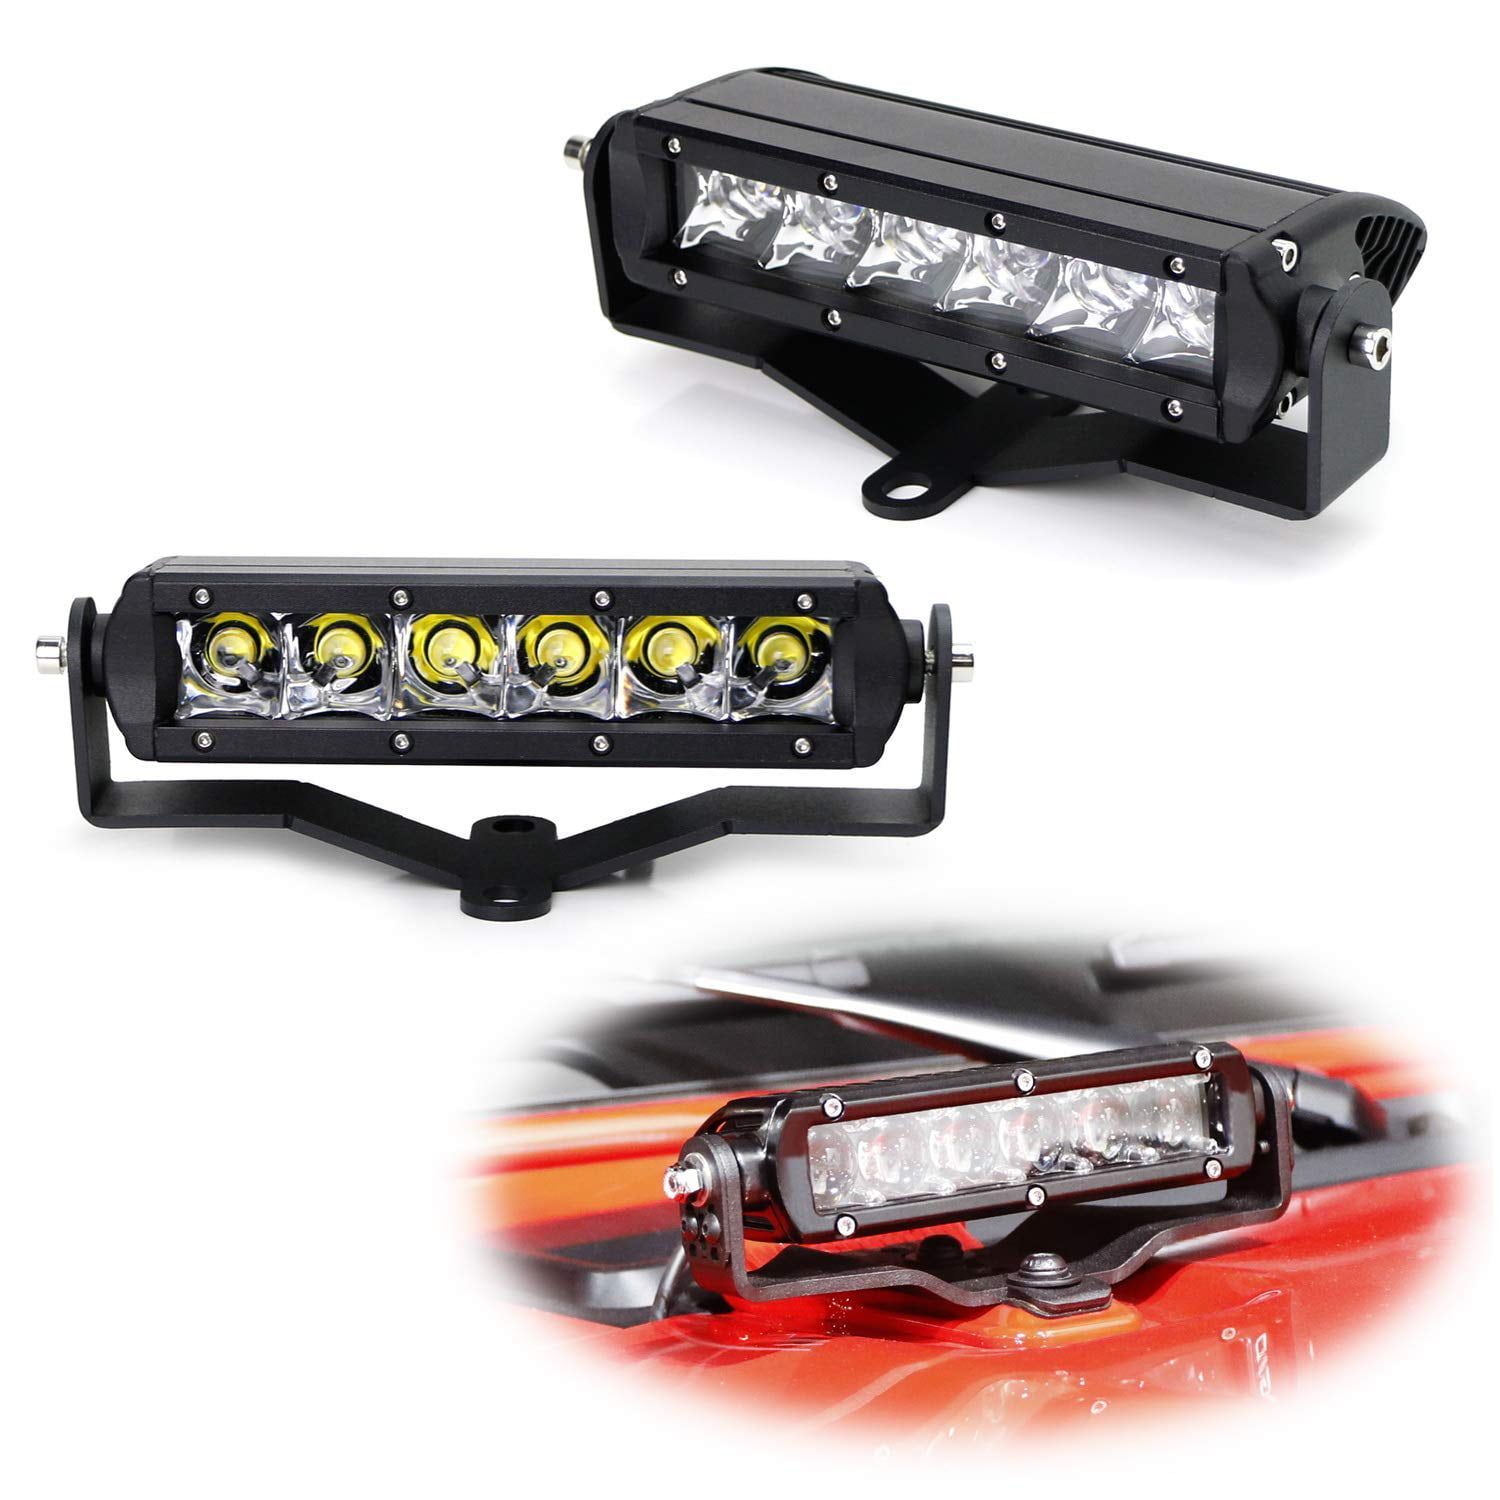 HEQIANG Hood Mount 30 Cree 150W LED Light Bar Combo Beam Kit for 2018-up Jeep Wrangler JL with Hood Mounting Brackets On Engine Top & On/Off Switch Wiring Kit 